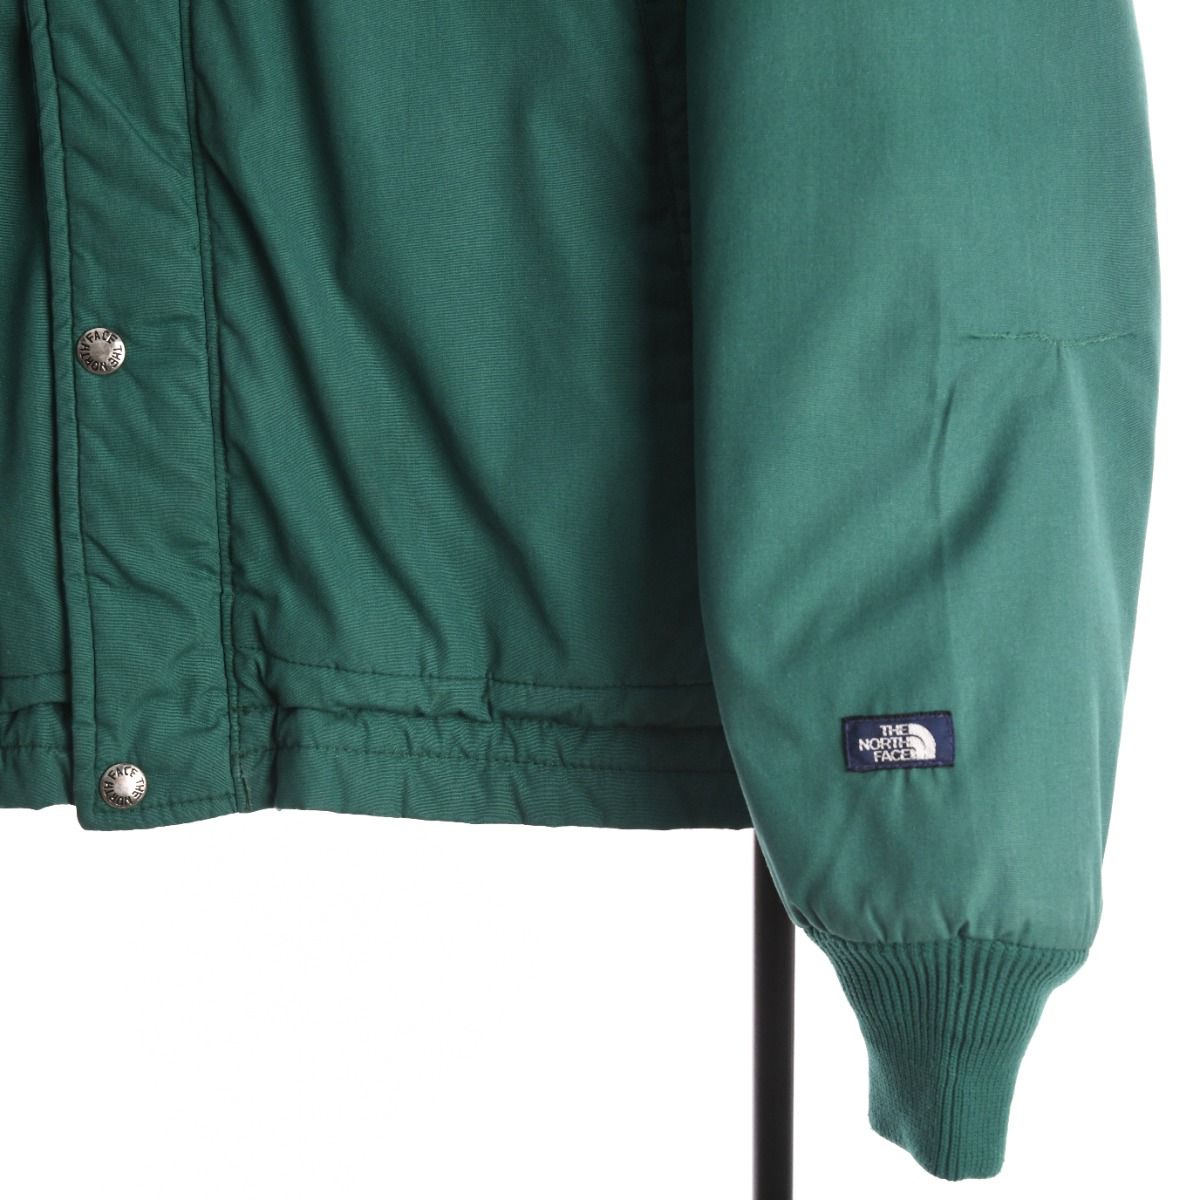 The North Face Gore-Tex 1970s Jacket